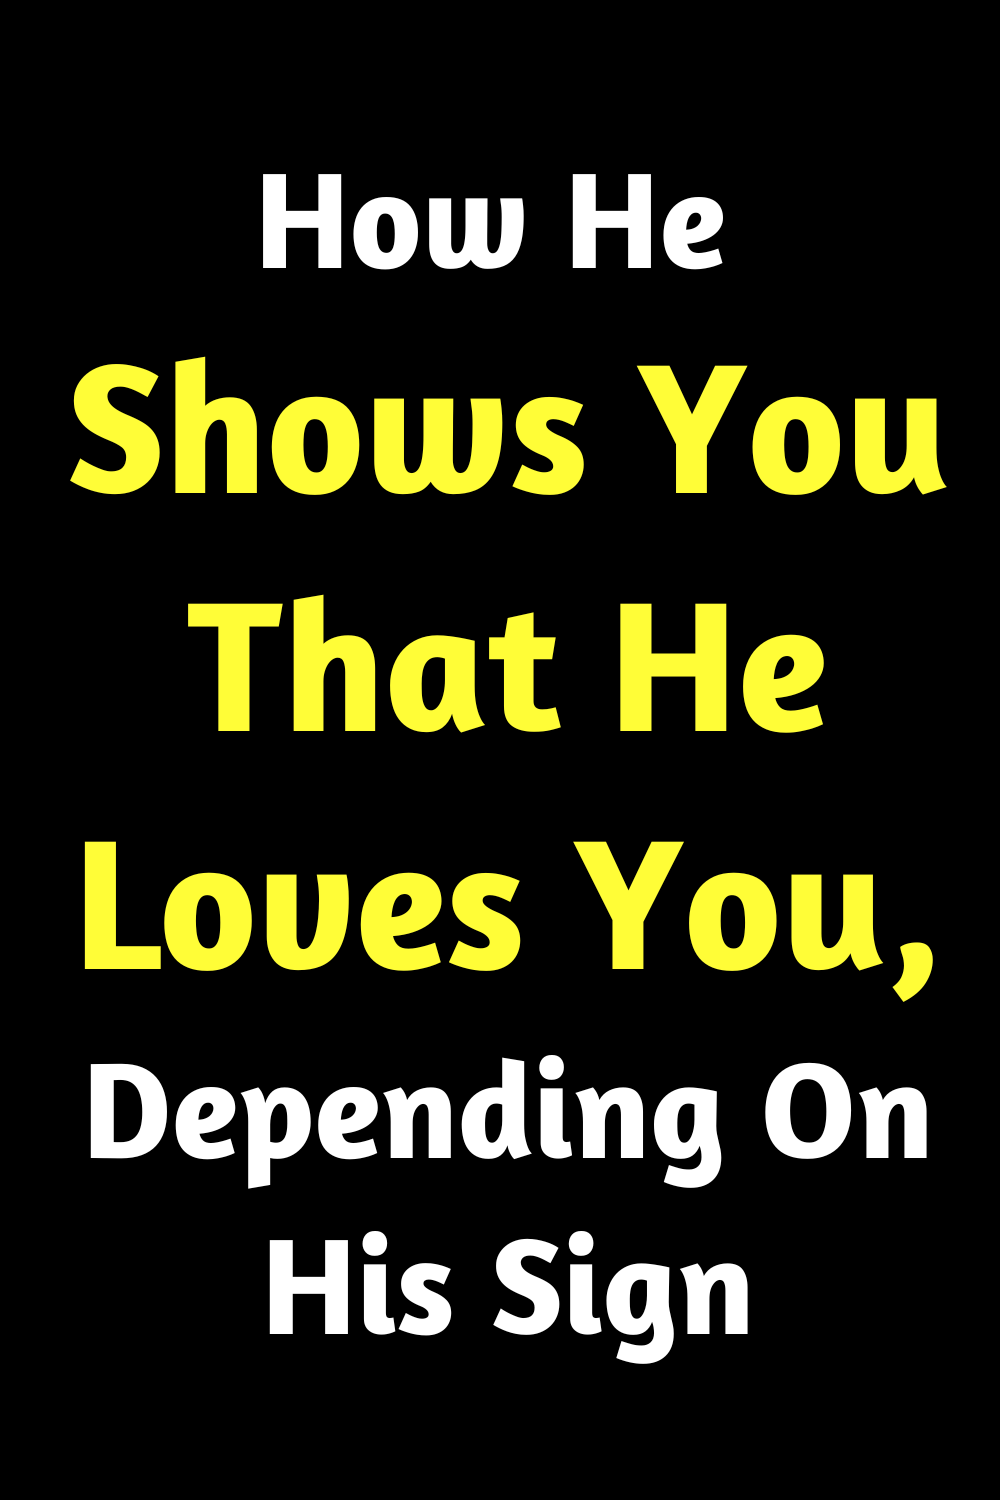 How He Shows You That He Loves You, Depending On His Sign